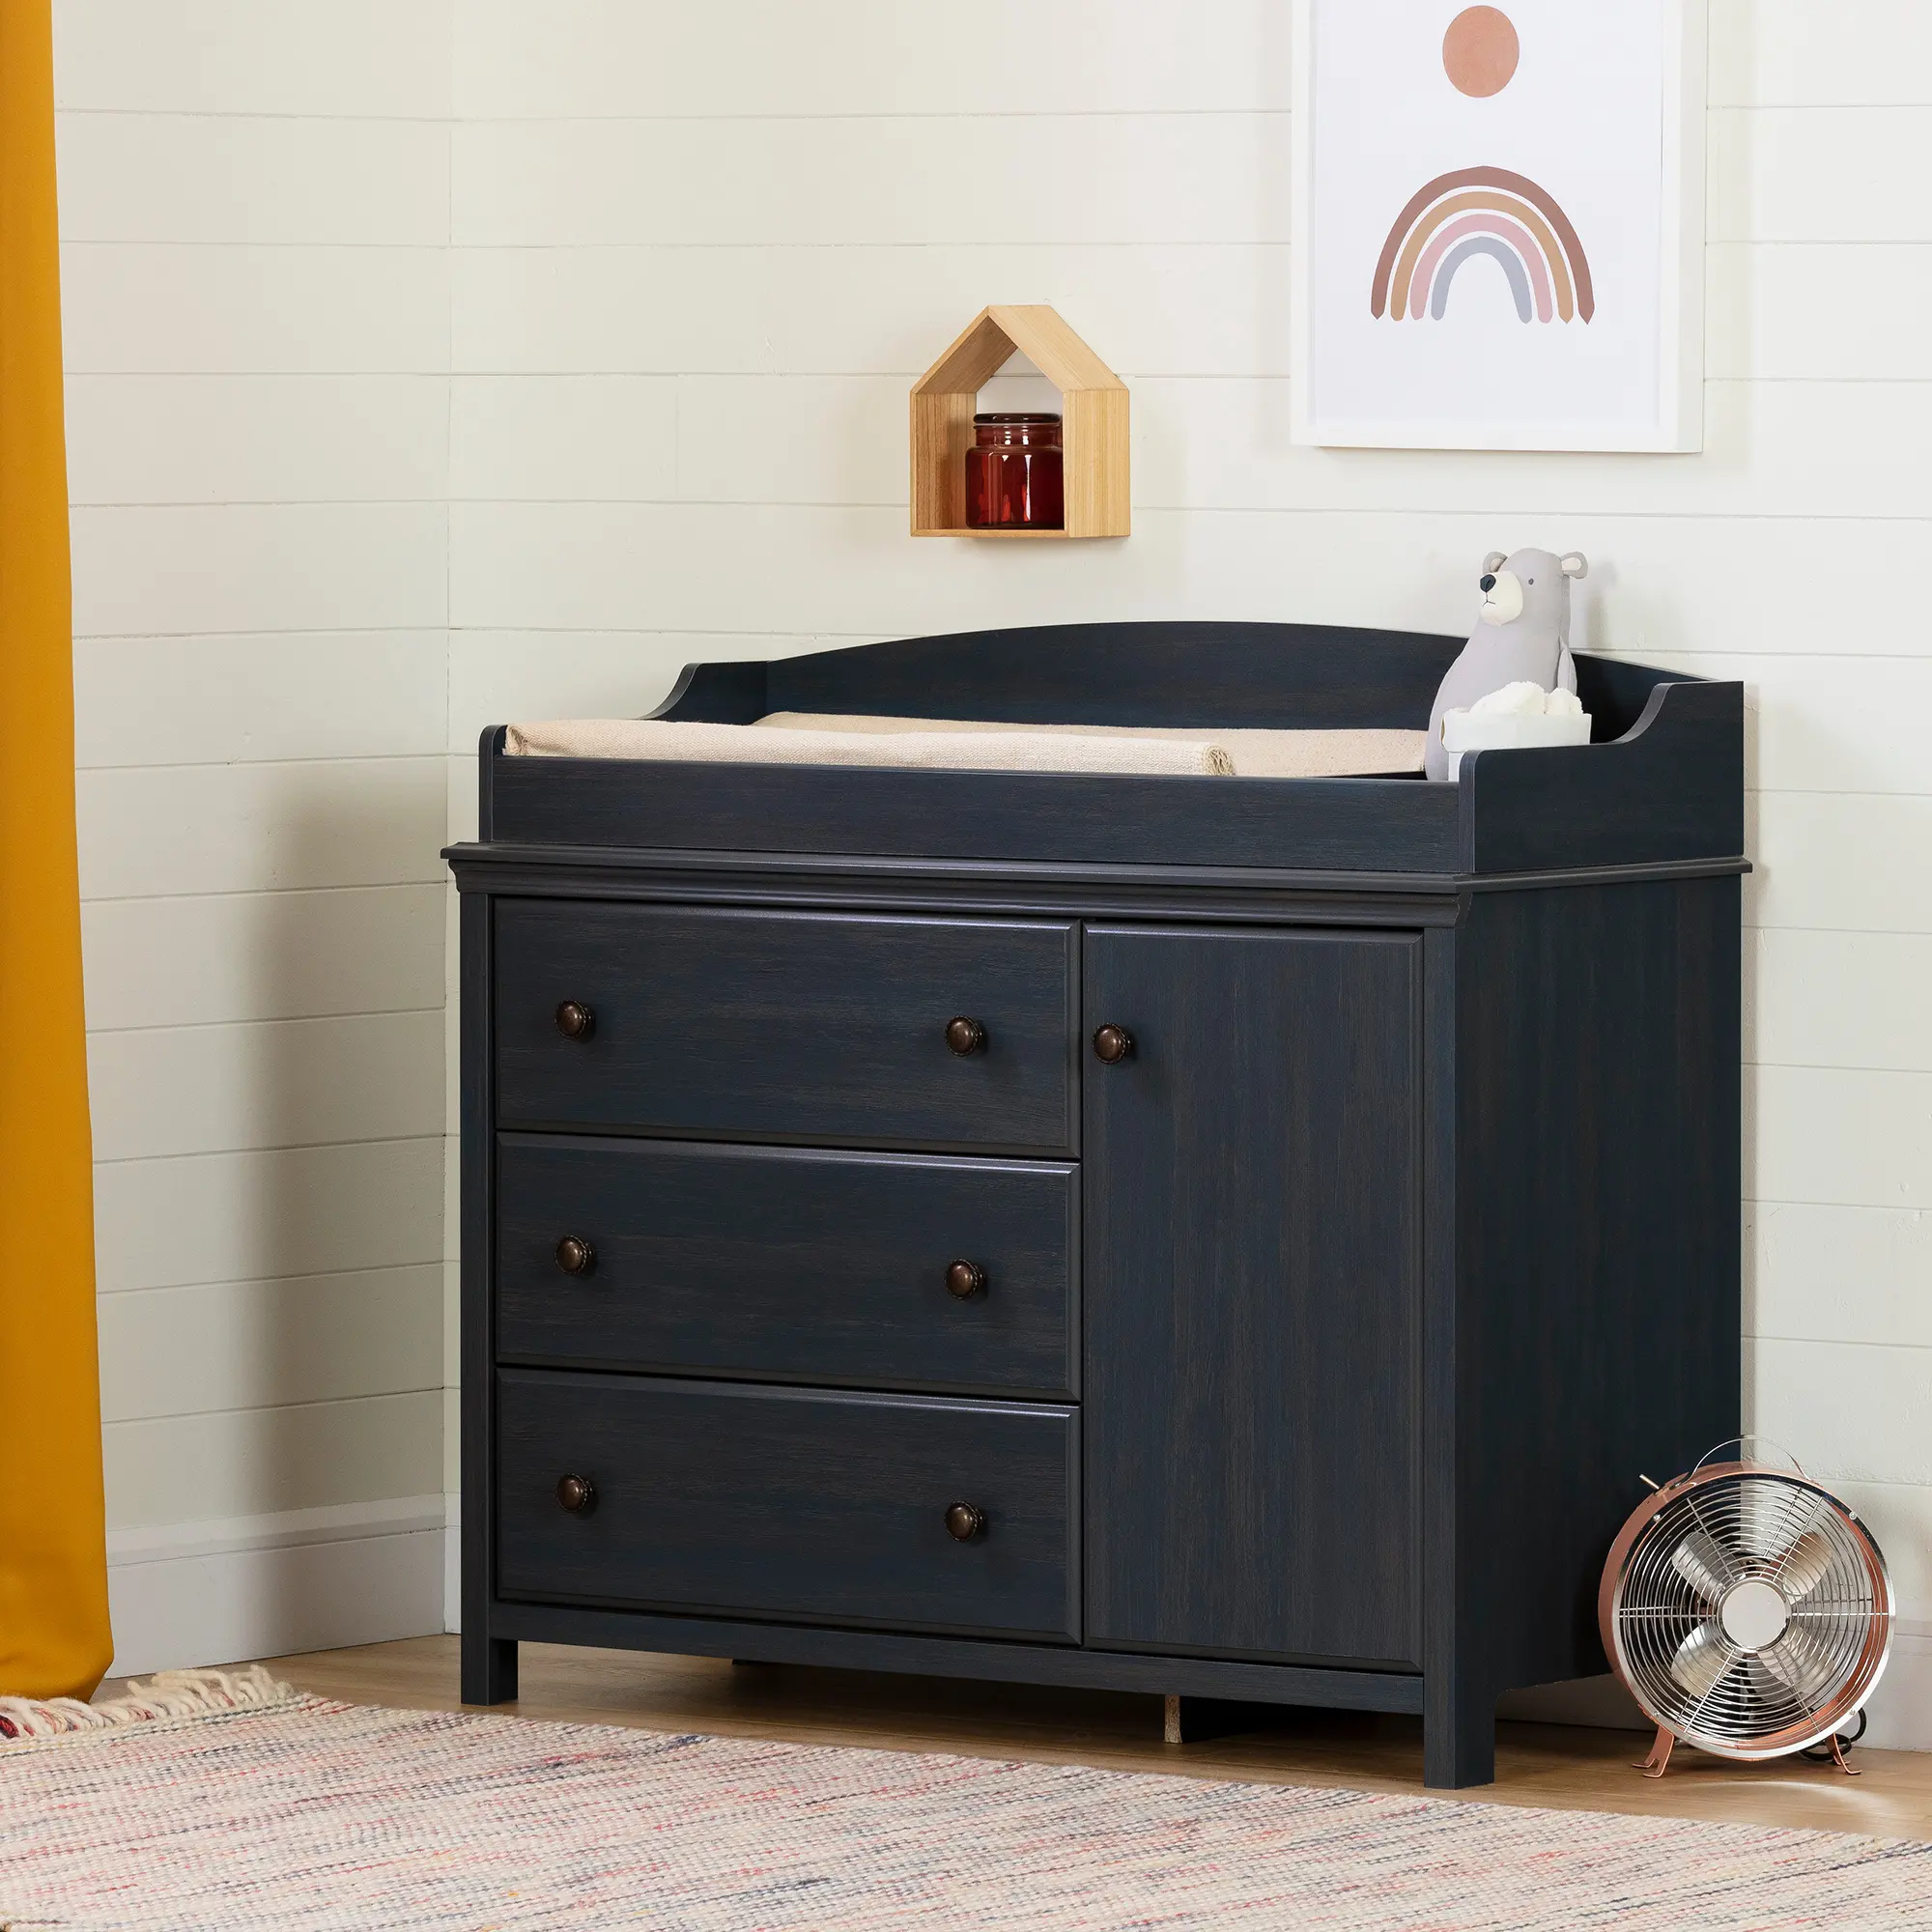 Cotton Candy Blue Changing Table - South Shore